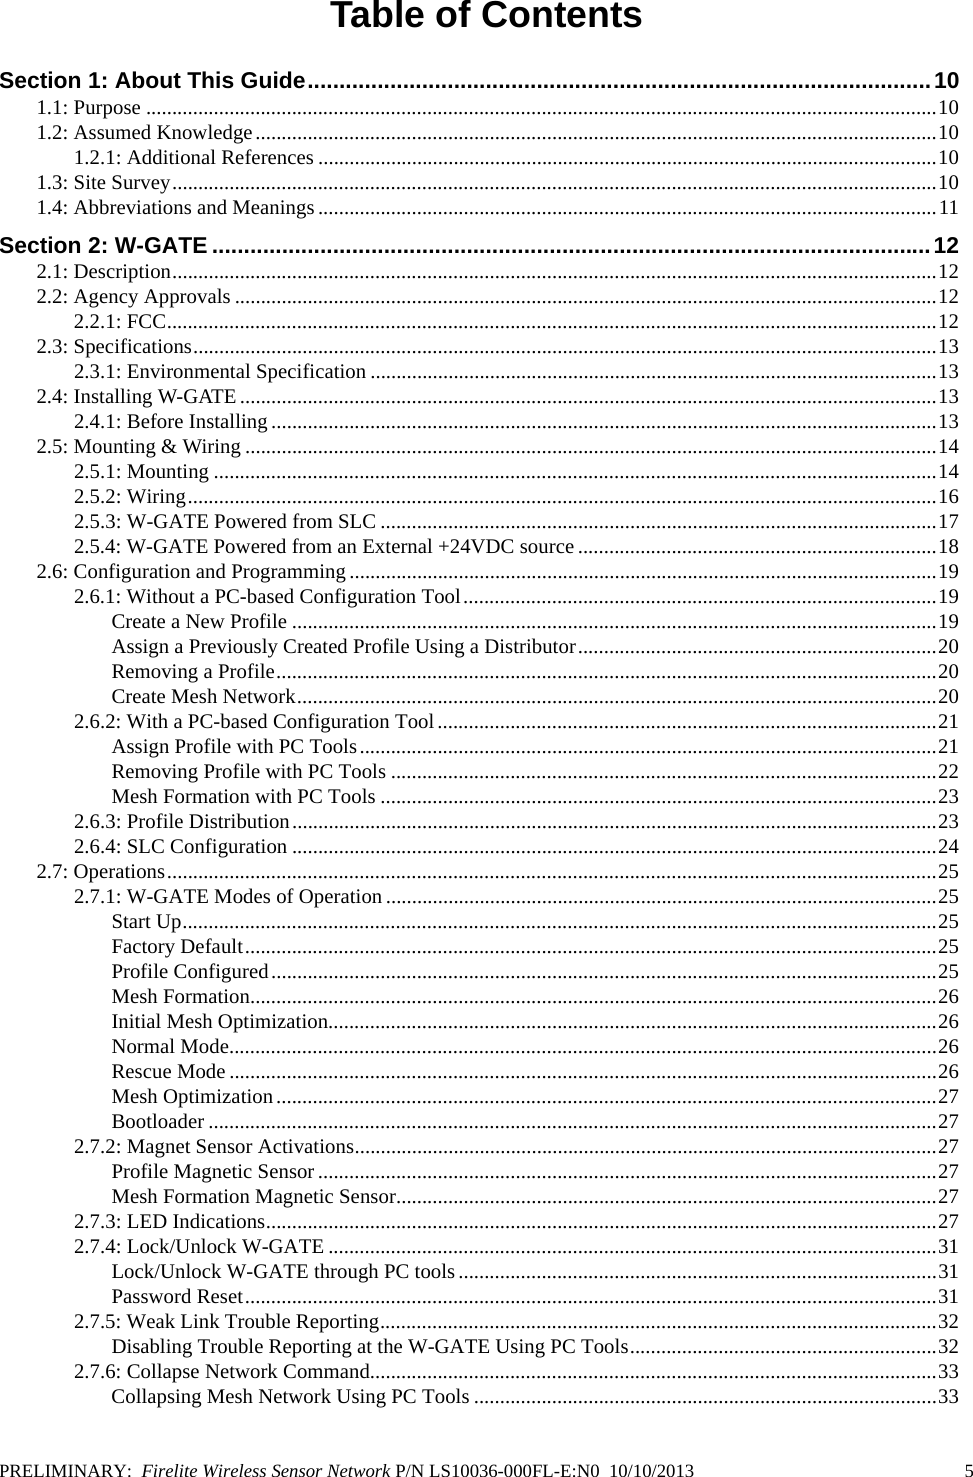 PRELIMINARY:  Firelite Wireless Sensor Network P/N LS10036-000FL-E:N0  10/10/2013   5Table of ContentsSection 1: About This Guide..................................................................................................101.1: Purpose ........................................................................................................................................................101.2: Assumed Knowledge...................................................................................................................................101.2.1: Additional References .......................................................................................................................101.3: Site Survey...................................................................................................................................................101.4: Abbreviations and Meanings.......................................................................................................................11Section 2: W-GATE .................................................................................................................122.1: Description...................................................................................................................................................122.2: Agency Approvals .......................................................................................................................................122.2.1: FCC....................................................................................................................................................122.3: Specifications...............................................................................................................................................132.3.1: Environmental Specification .............................................................................................................132.4: Installing W-GATE ......................................................................................................................................132.4.1: Before Installing ................................................................................................................................132.5: Mounting &amp; Wiring .....................................................................................................................................142.5.1: Mounting ...........................................................................................................................................142.5.2: Wiring................................................................................................................................................162.5.3: W-GATE Powered from SLC ...........................................................................................................172.5.4: W-GATE Powered from an External +24VDC source .....................................................................182.6: Configuration and Programming.................................................................................................................192.6.1: Without a PC-based Configuration Tool...........................................................................................19Create a New Profile ............................................................................................................................19Assign a Previously Created Profile Using a Distributor.....................................................................20Removing a Profile...............................................................................................................................20Create Mesh Network...........................................................................................................................202.6.2: With a PC-based Configuration Tool................................................................................................21Assign Profile with PC Tools...............................................................................................................21Removing Profile with PC Tools .........................................................................................................22Mesh Formation with PC Tools ...........................................................................................................232.6.3: Profile Distribution............................................................................................................................232.6.4: SLC Configuration ............................................................................................................................242.7: Operations....................................................................................................................................................252.7.1: W-GATE Modes of Operation ..........................................................................................................25Start Up.................................................................................................................................................25Factory Default.....................................................................................................................................25Profile Configured................................................................................................................................25Mesh Formation....................................................................................................................................26Initial Mesh Optimization.....................................................................................................................26Normal Mode........................................................................................................................................26Rescue Mode ........................................................................................................................................26Mesh Optimization...............................................................................................................................27Bootloader ............................................................................................................................................272.7.2: Magnet Sensor Activations................................................................................................................27Profile Magnetic Sensor .......................................................................................................................27Mesh Formation Magnetic Sensor........................................................................................................272.7.3: LED Indications.................................................................................................................................272.7.4: Lock/Unlock W-GATE .....................................................................................................................31Lock/Unlock W-GATE through PC tools............................................................................................31Password Reset.....................................................................................................................................312.7.5: Weak Link Trouble Reporting...........................................................................................................32Disabling Trouble Reporting at the W-GATE Using PC Tools...........................................................322.7.6: Collapse Network Command.............................................................................................................33Collapsing Mesh Network Using PC Tools .........................................................................................33